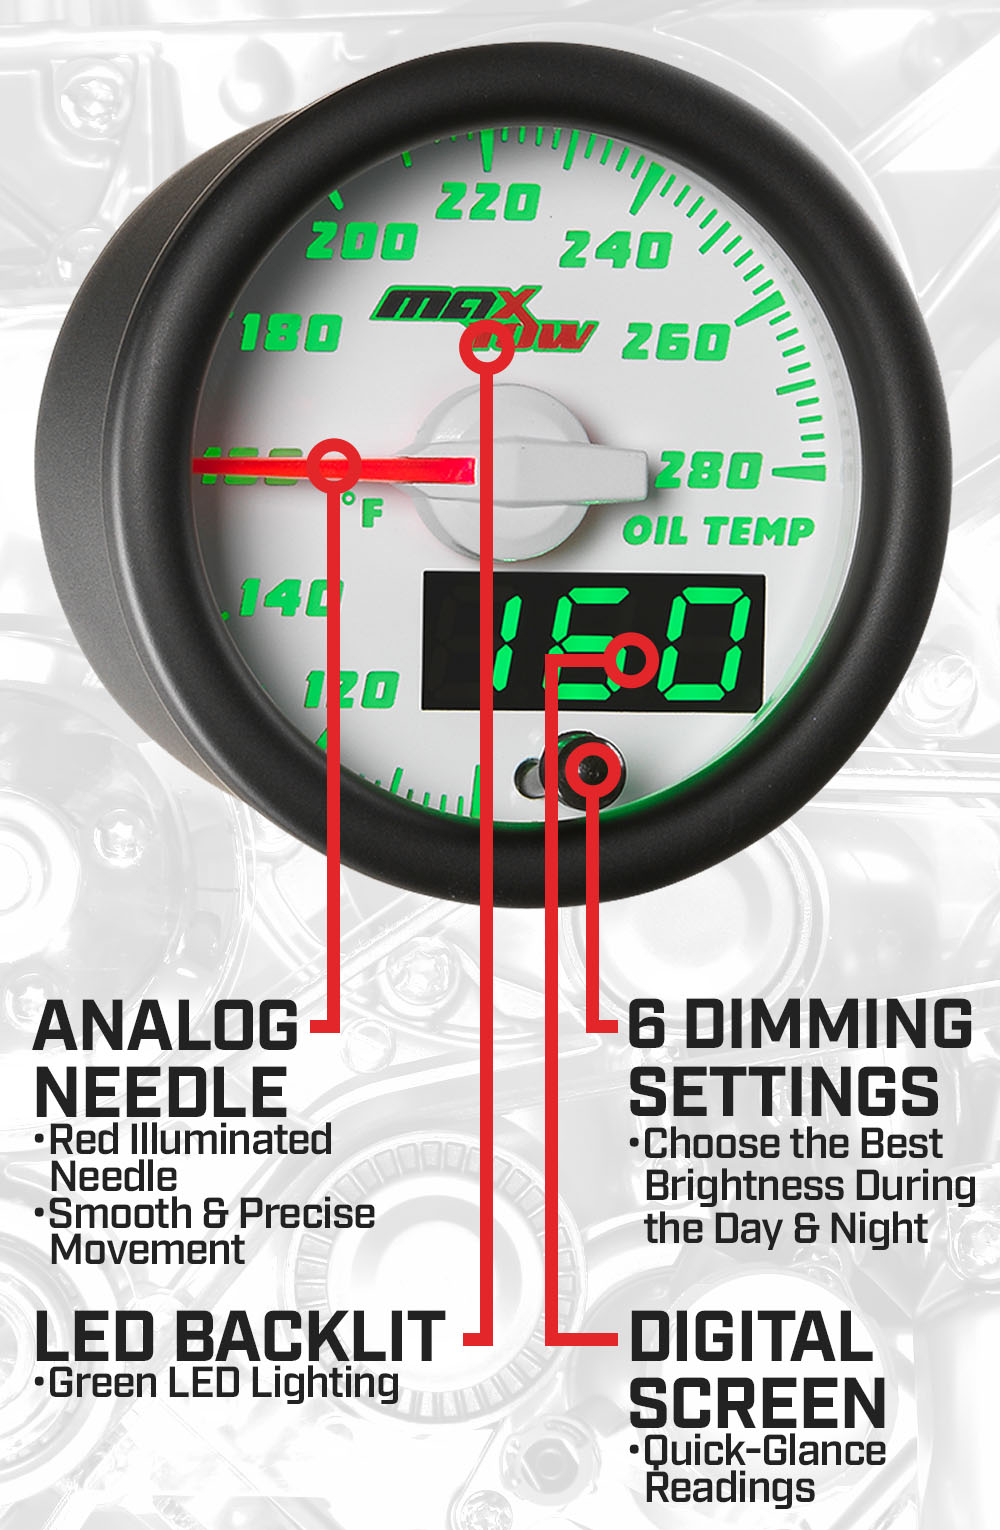 White & Green Double Vision Oil Temperature Gauge Features